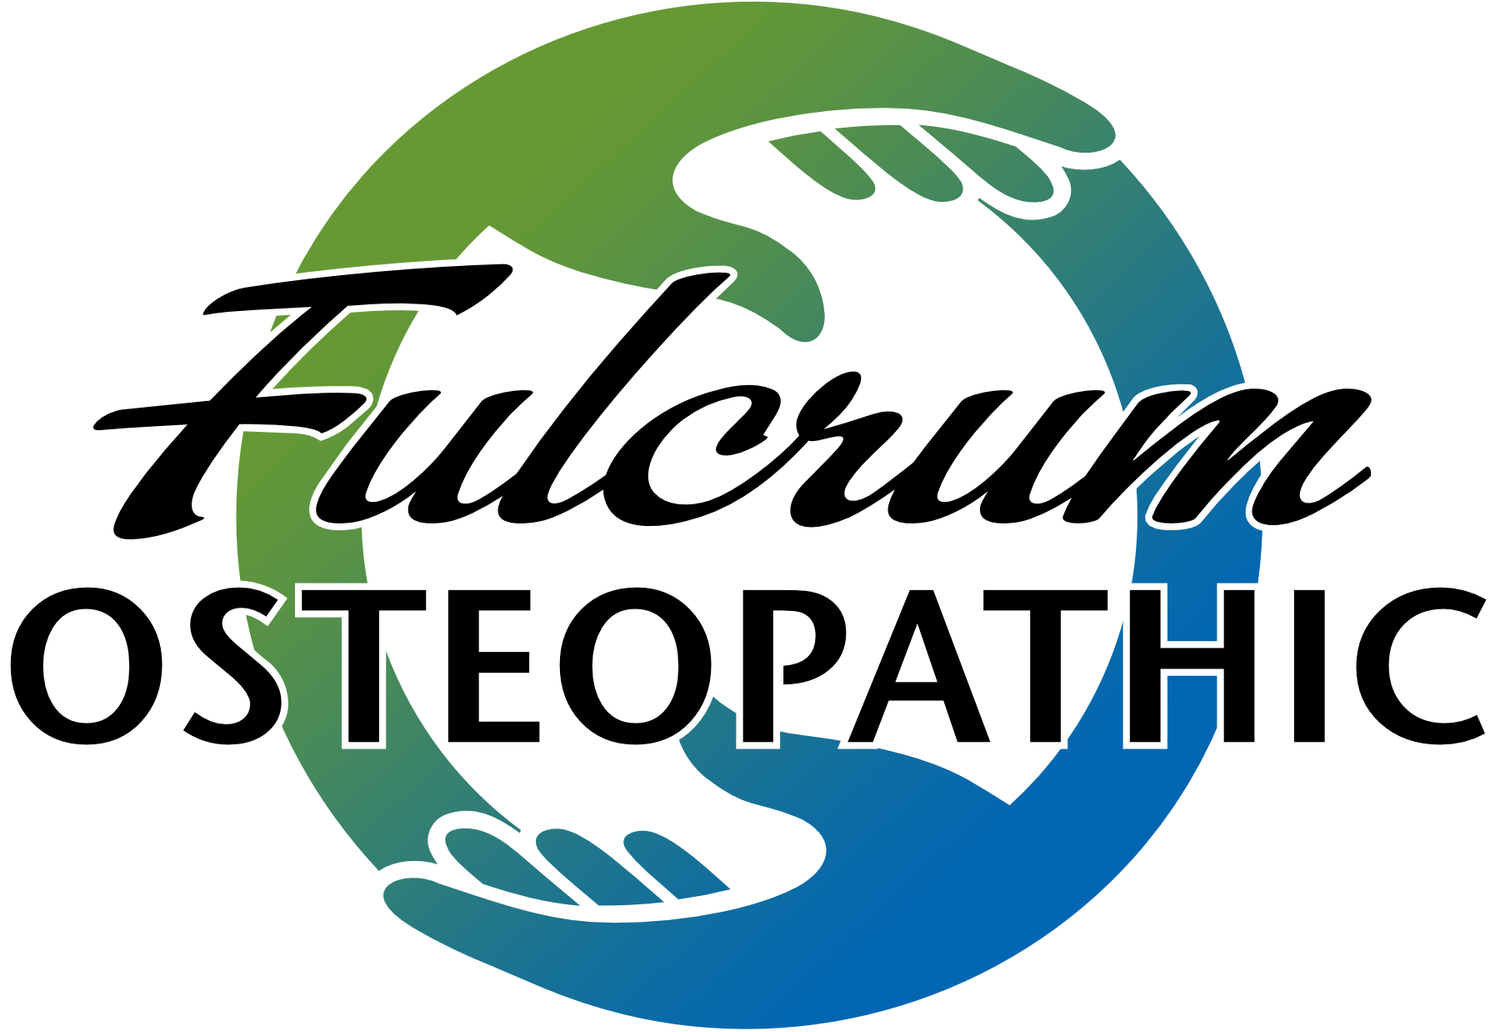 Welcome to Fulcrum Osteopathic!